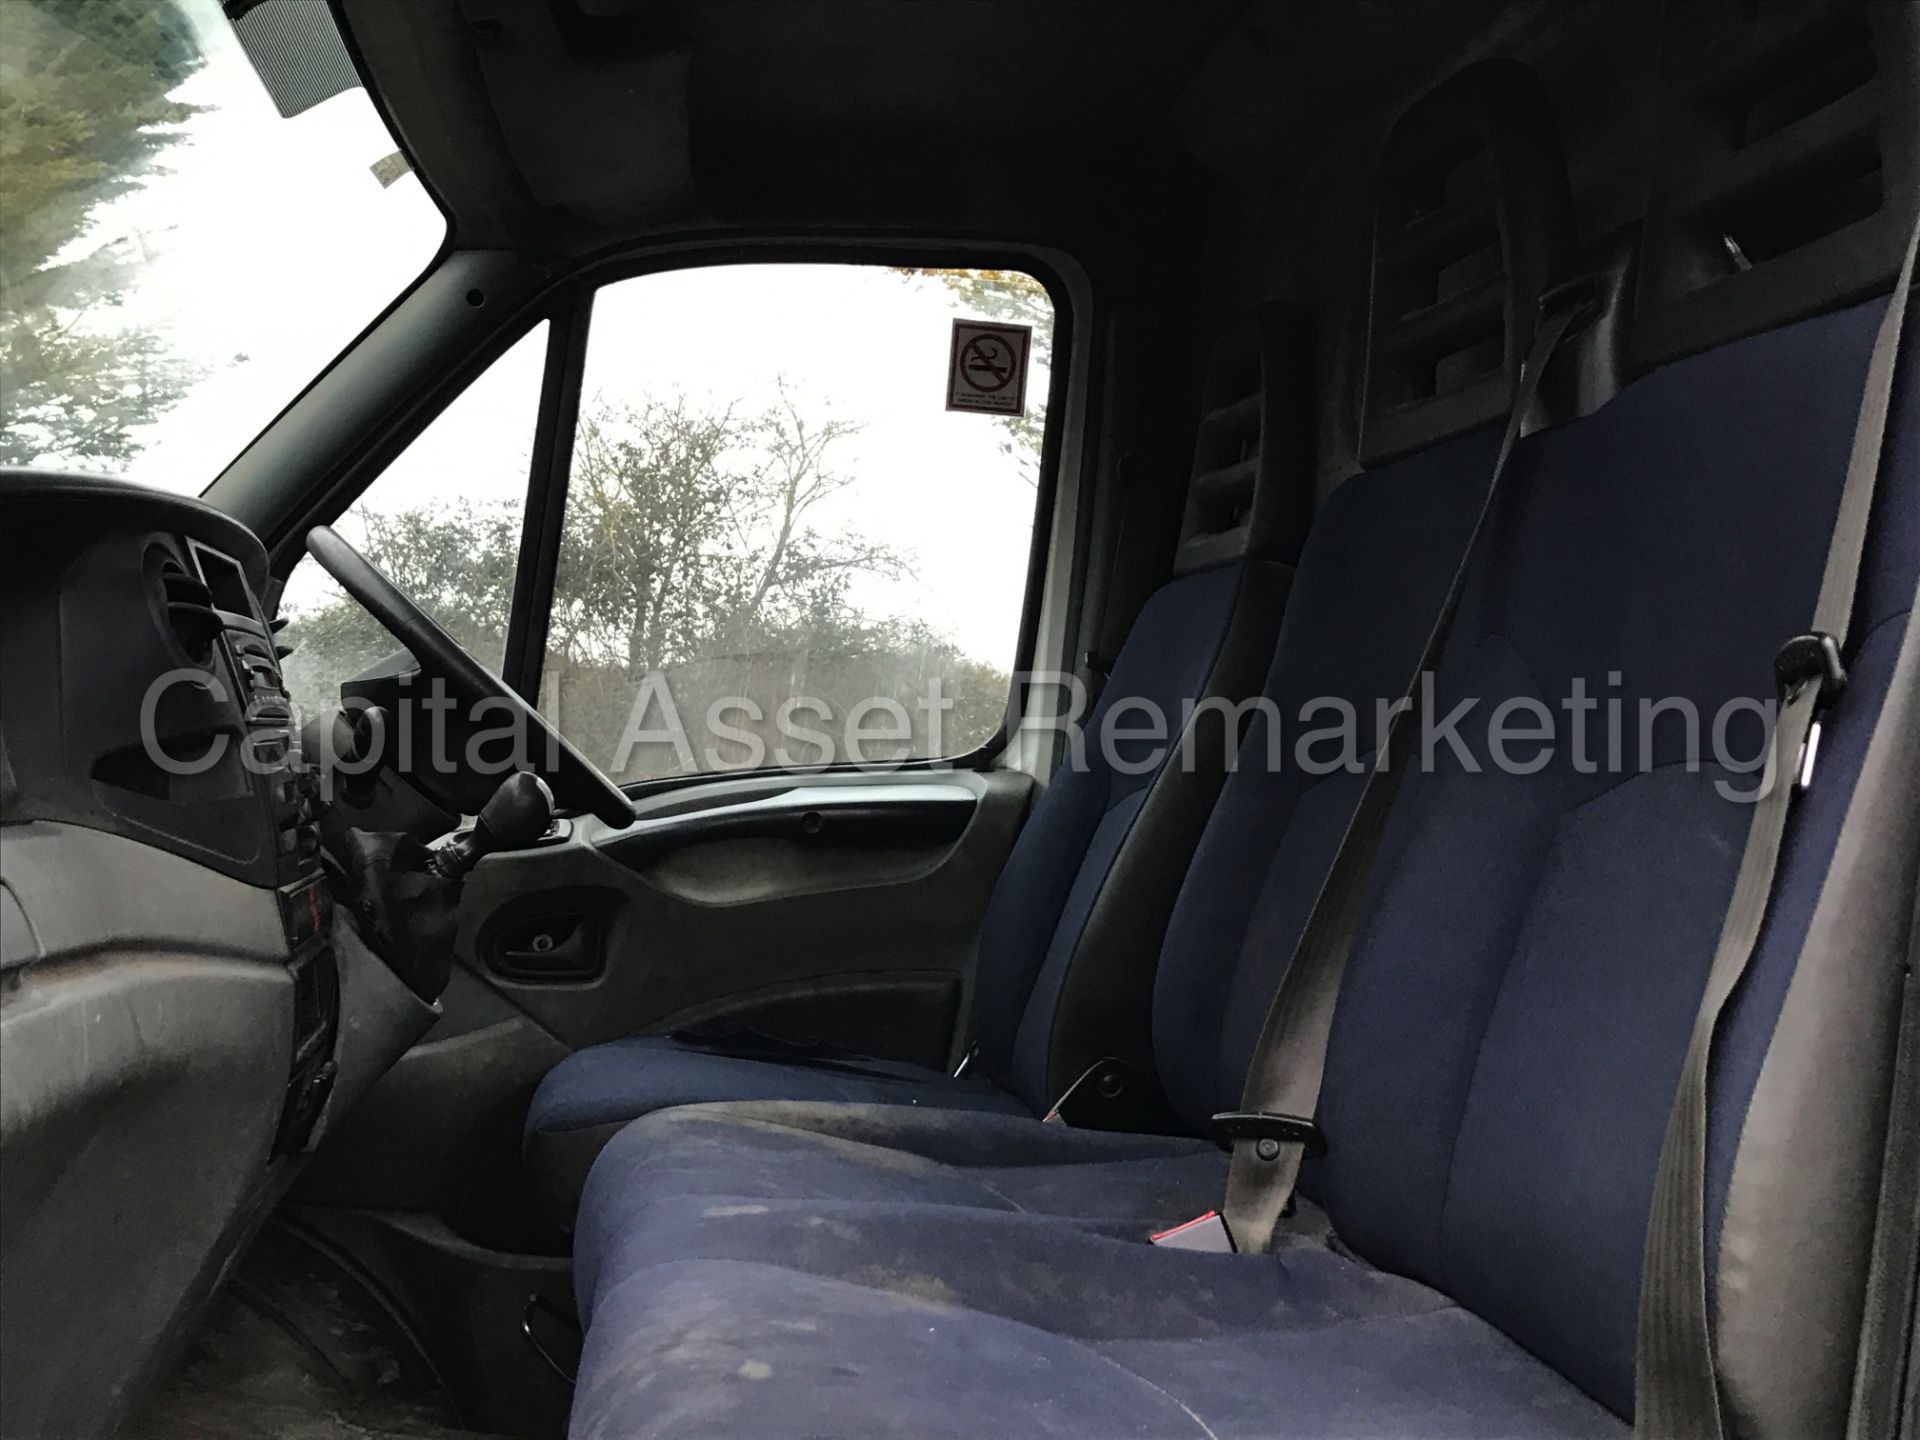 IVECO DAILY 35S12 'MWB HI-ROOF' (2009) '2.3 DIESEL - 120 BHP - 5 SPEED' (1 COMPANY OWNER) - Image 11 of 15